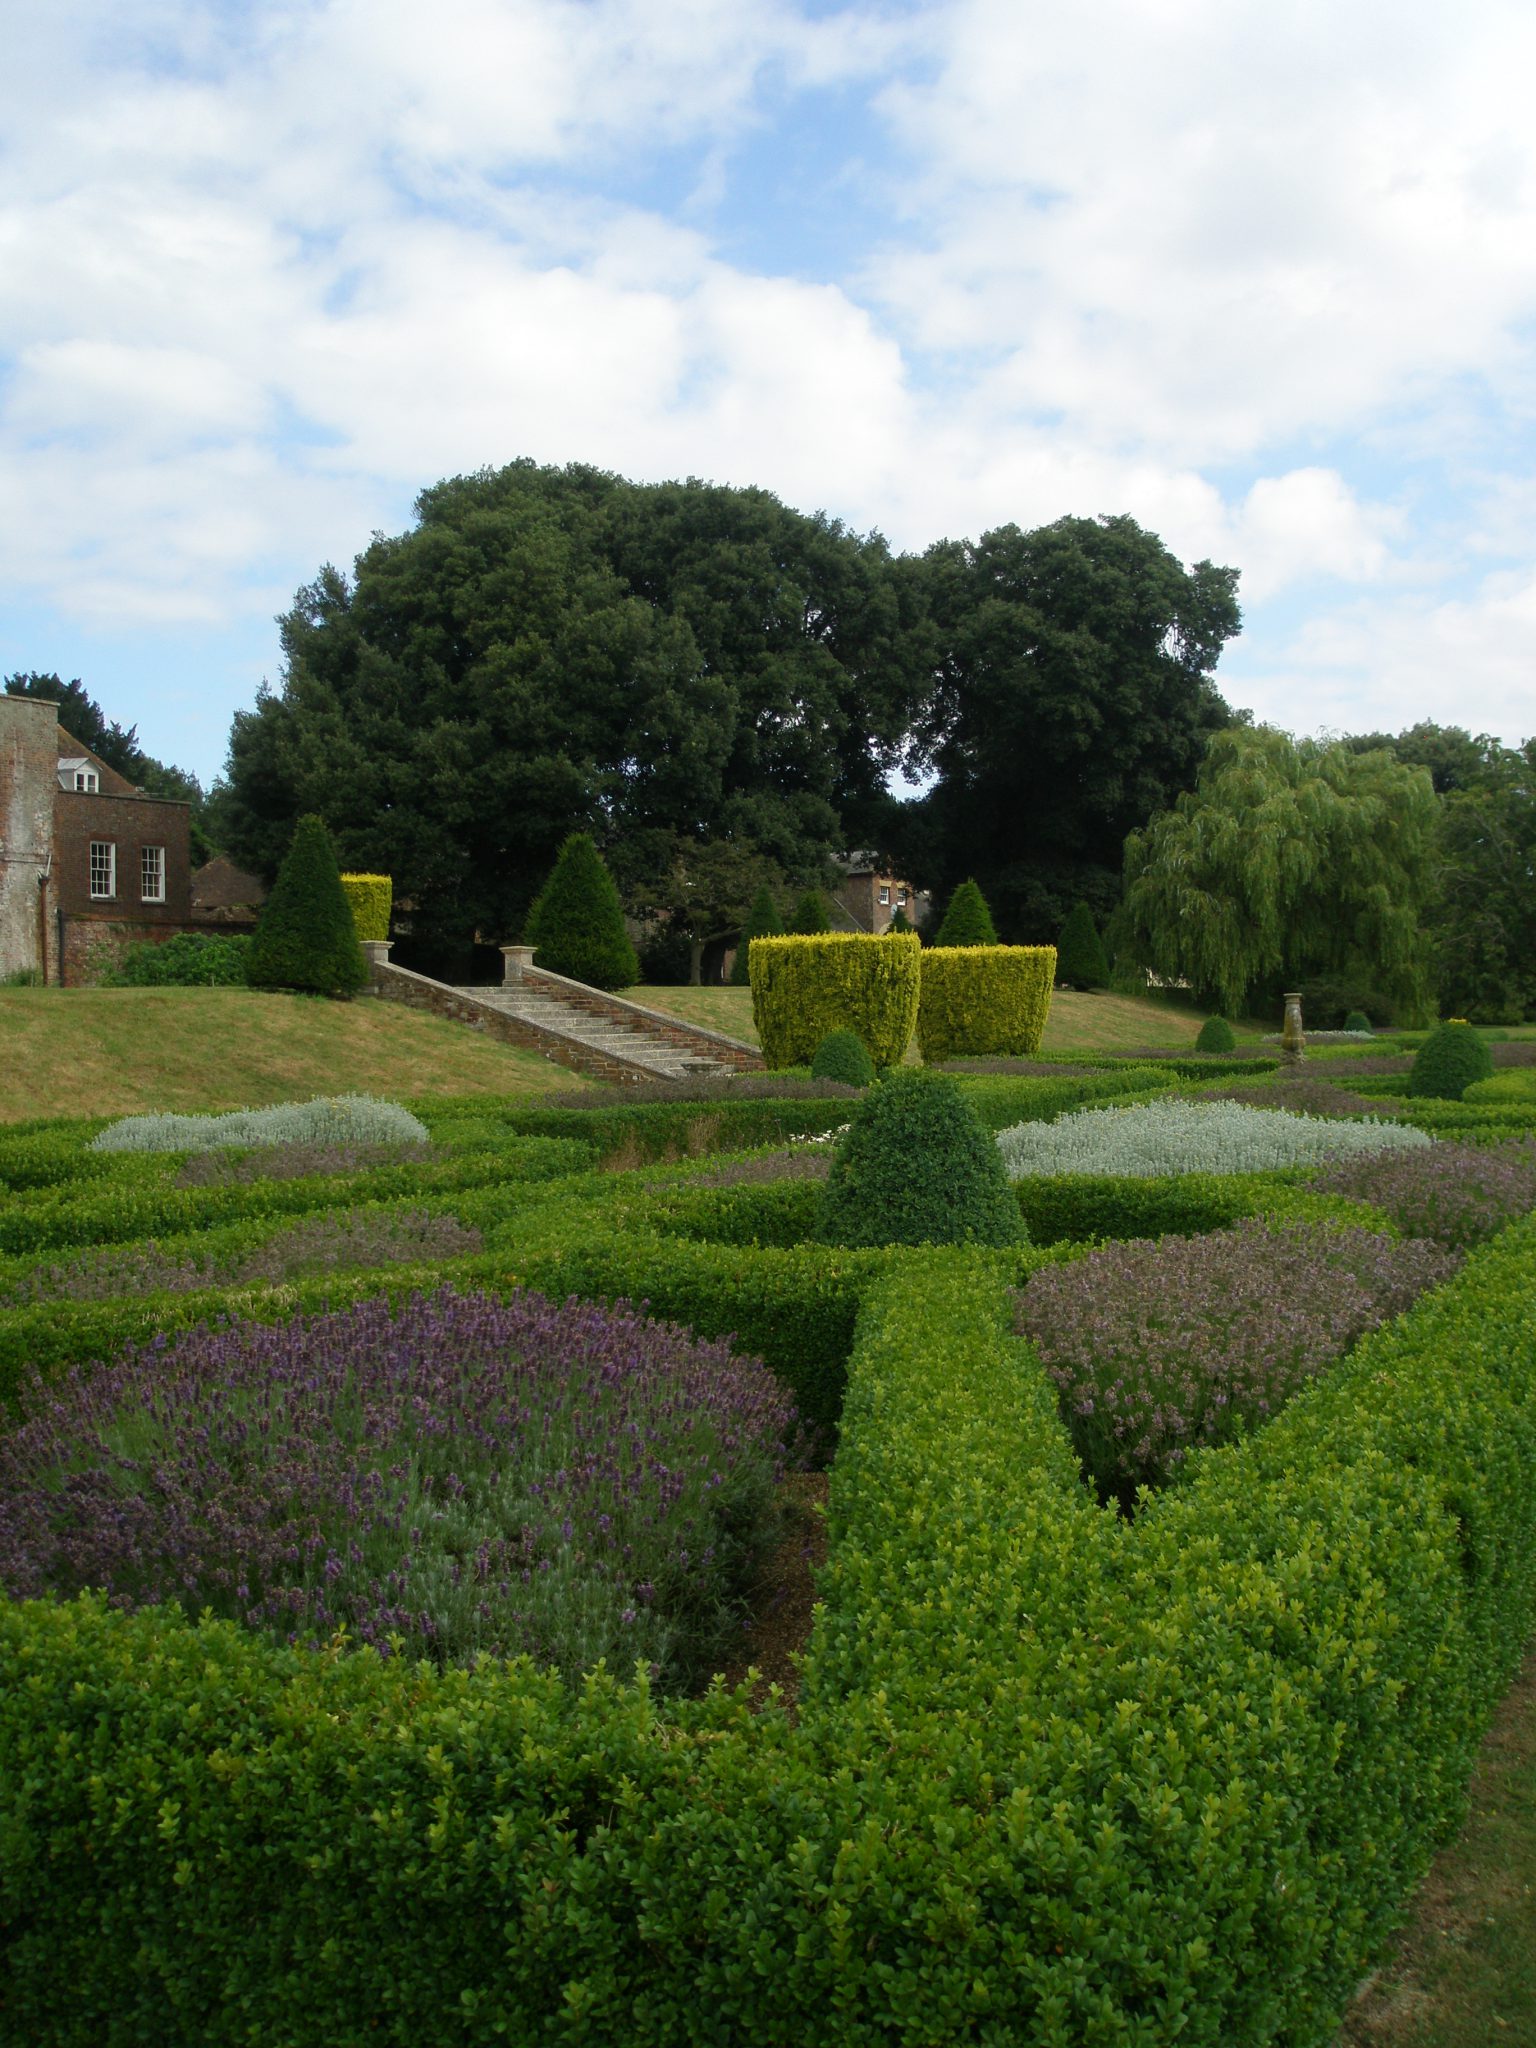 The Parterre, planted in 2000 to echo the design of the original gardens of 1719.